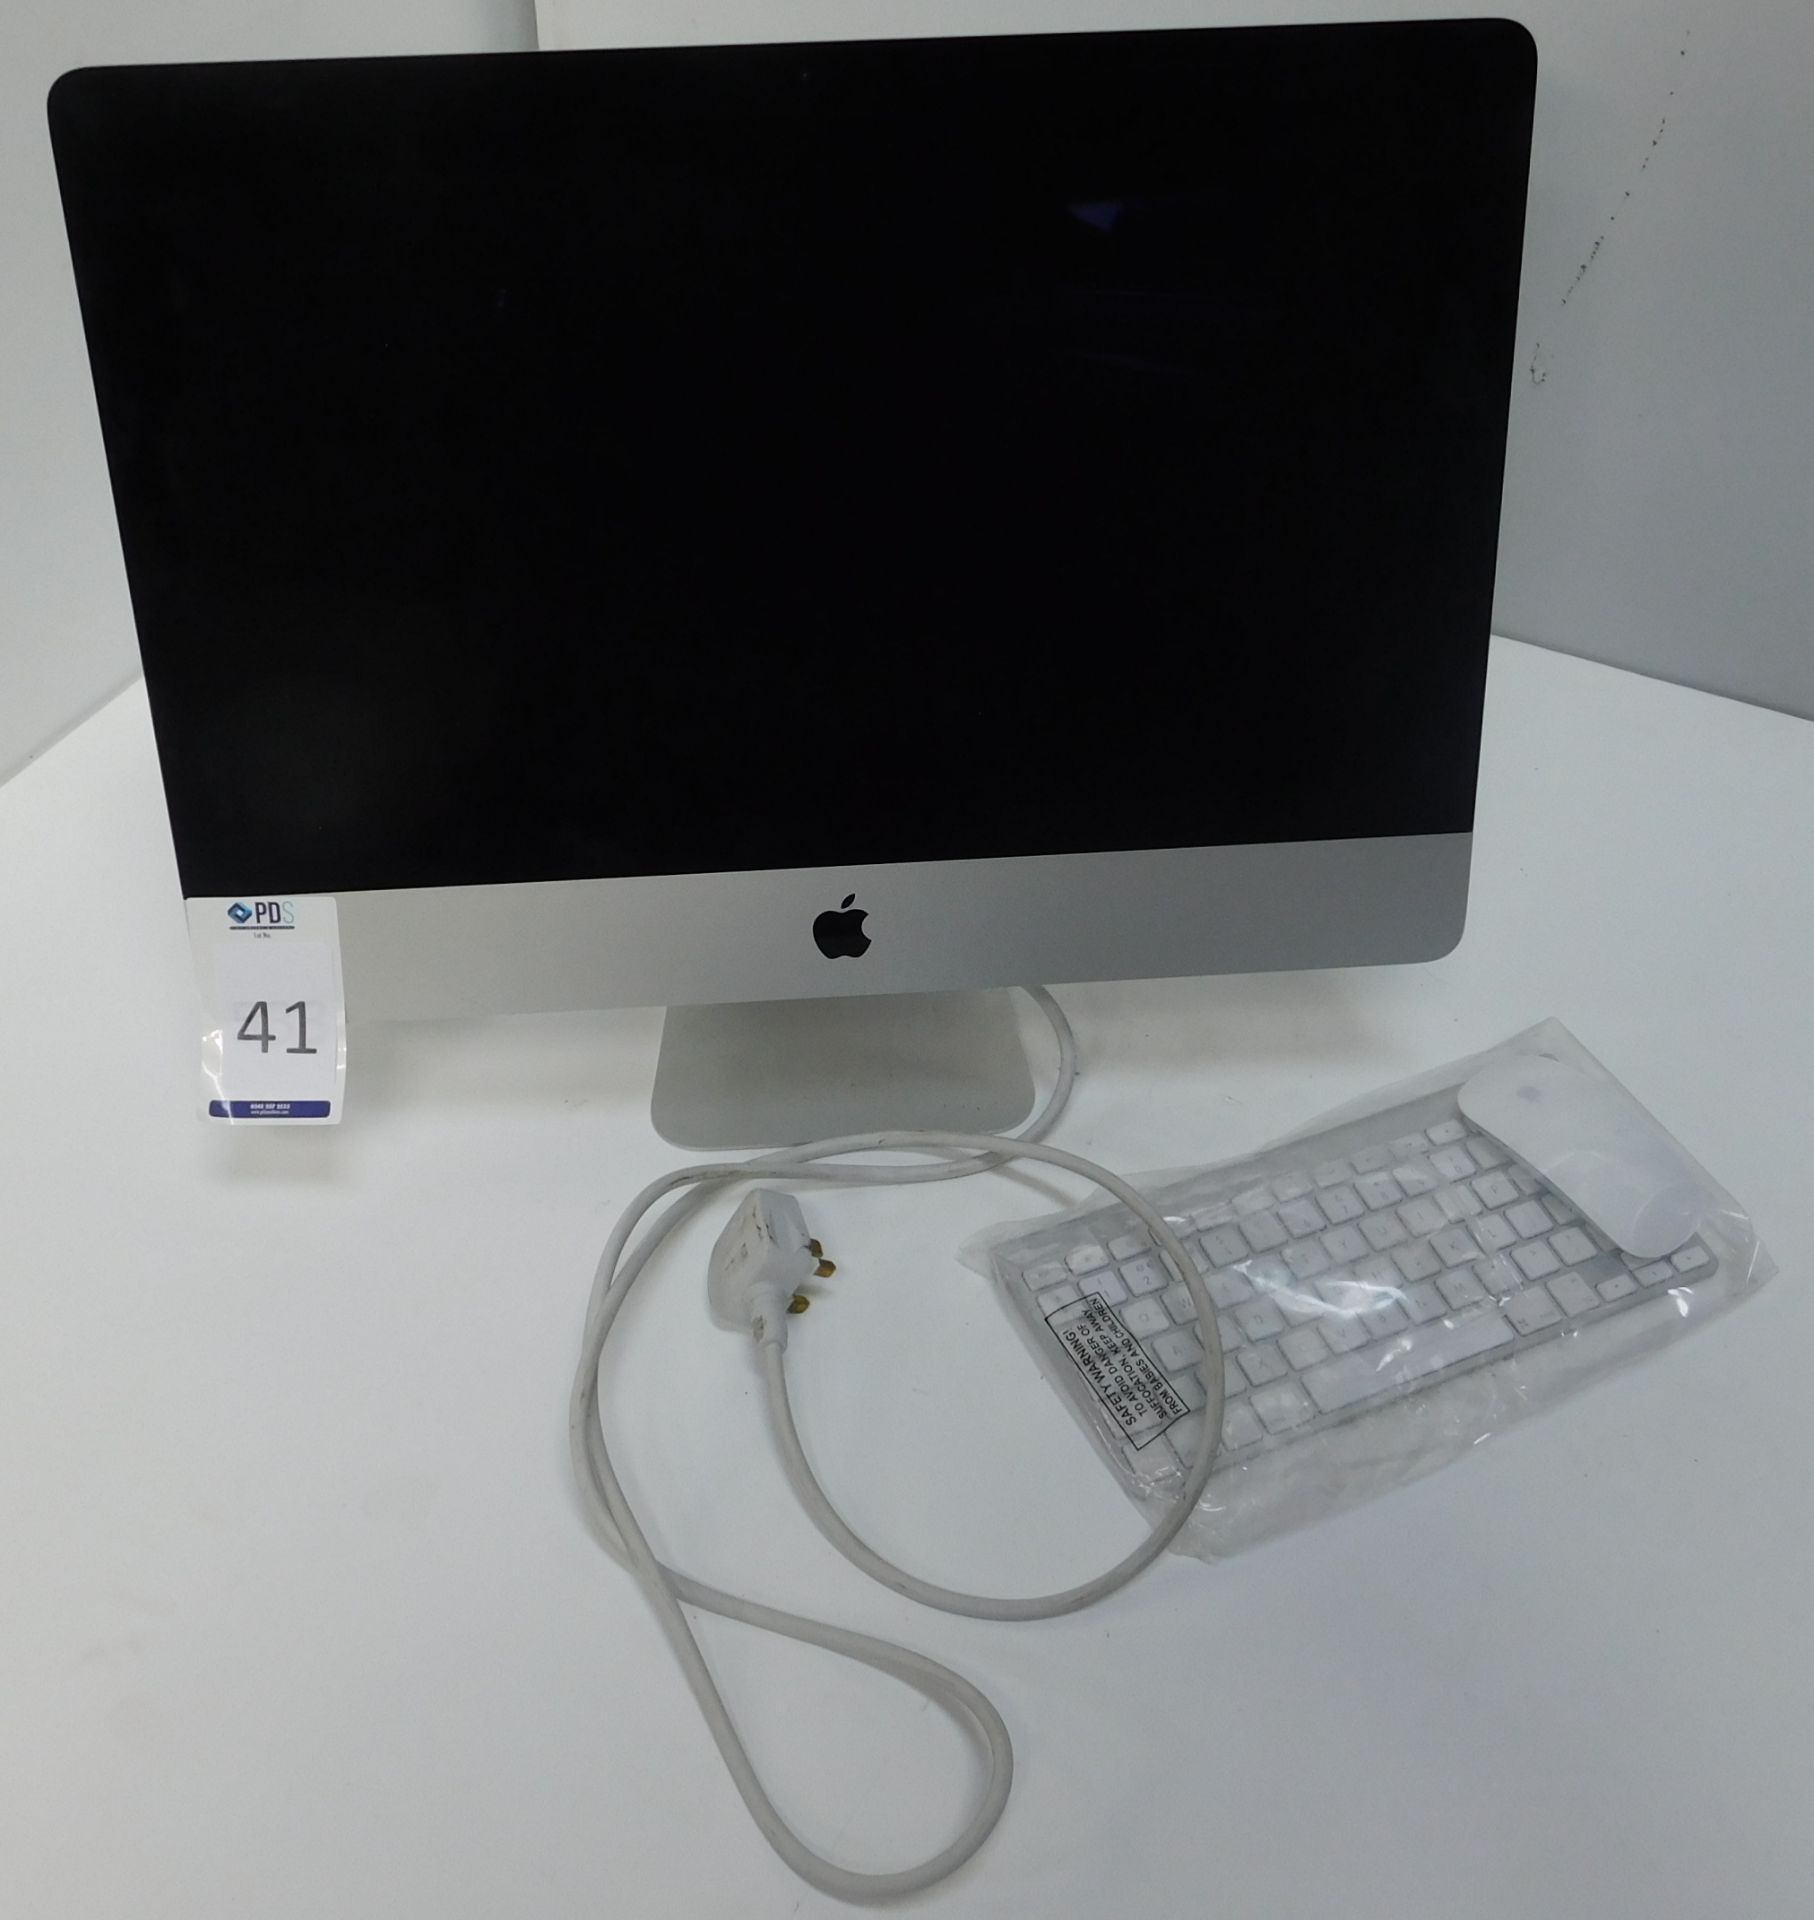 Apple iMac, 21.5 Inch Display, 1.6GHz, Core i5 (2015), Serial Number: C025Q4X4GF1J (Located